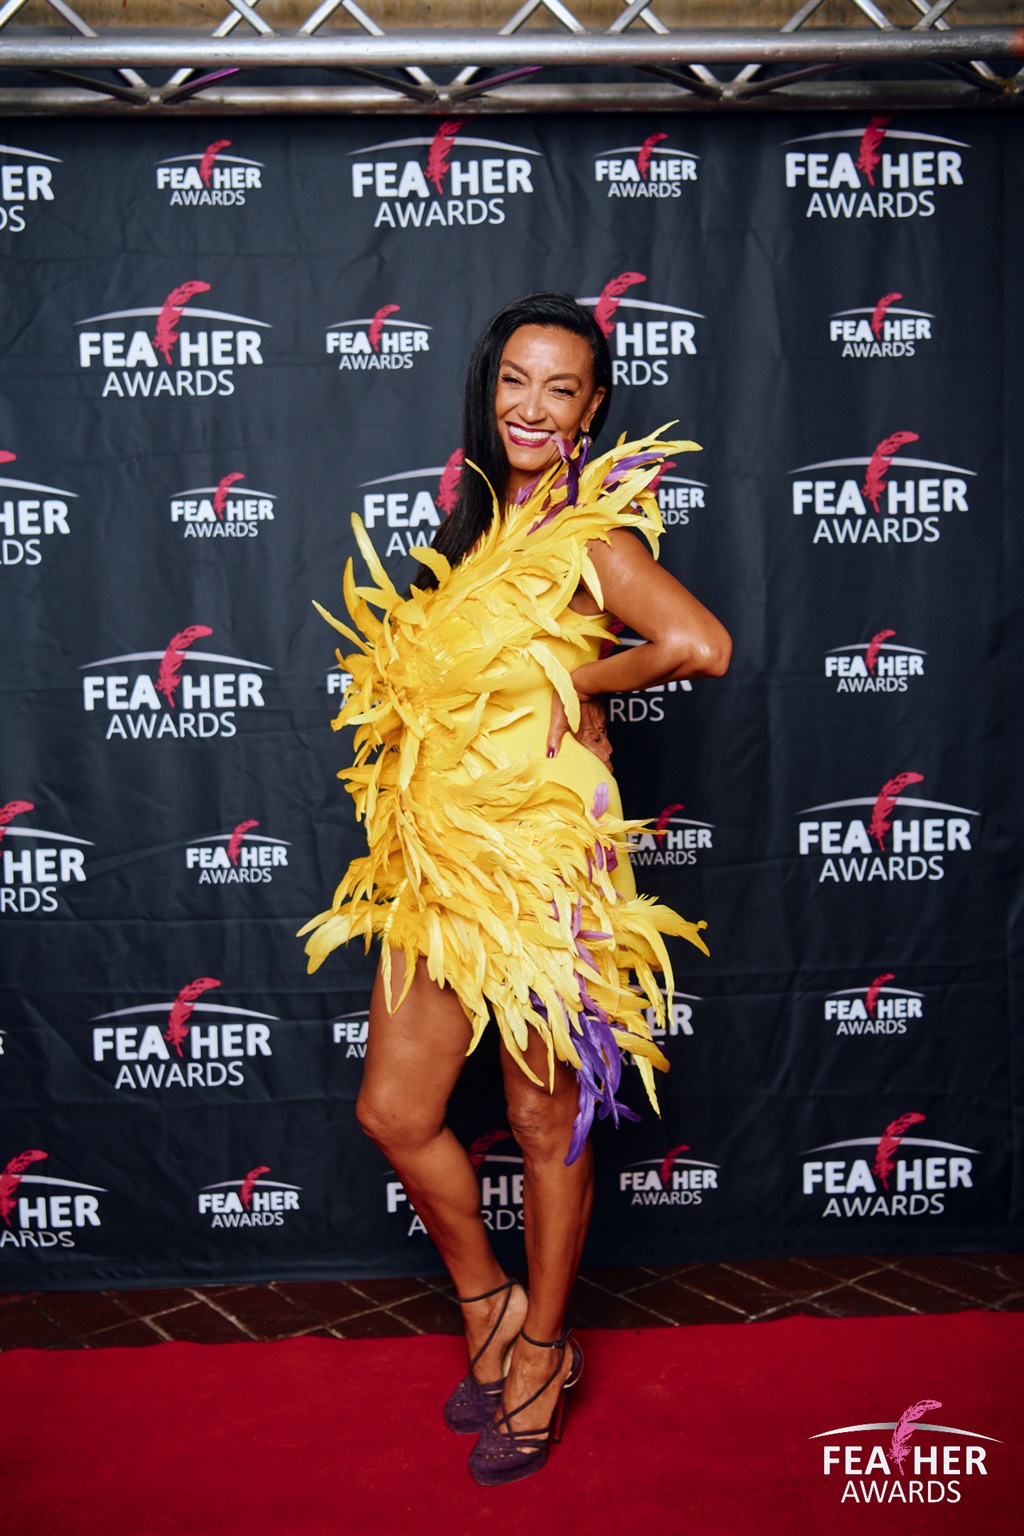 Feather Awards 2022